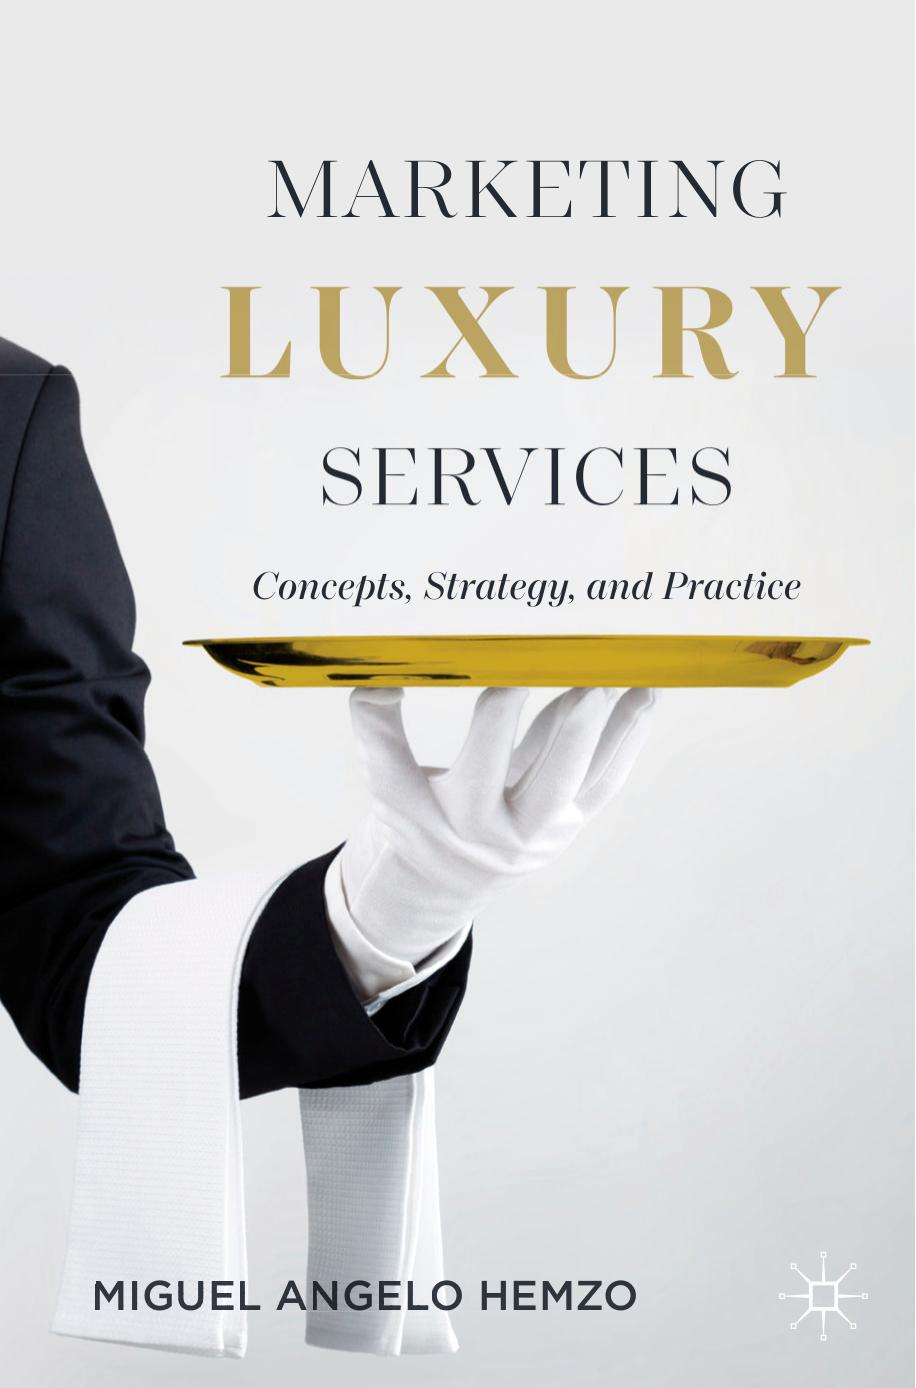 Marketing Luxury Services: Concepts, Strategy, and Practice by Miguel Angelo Hemzo